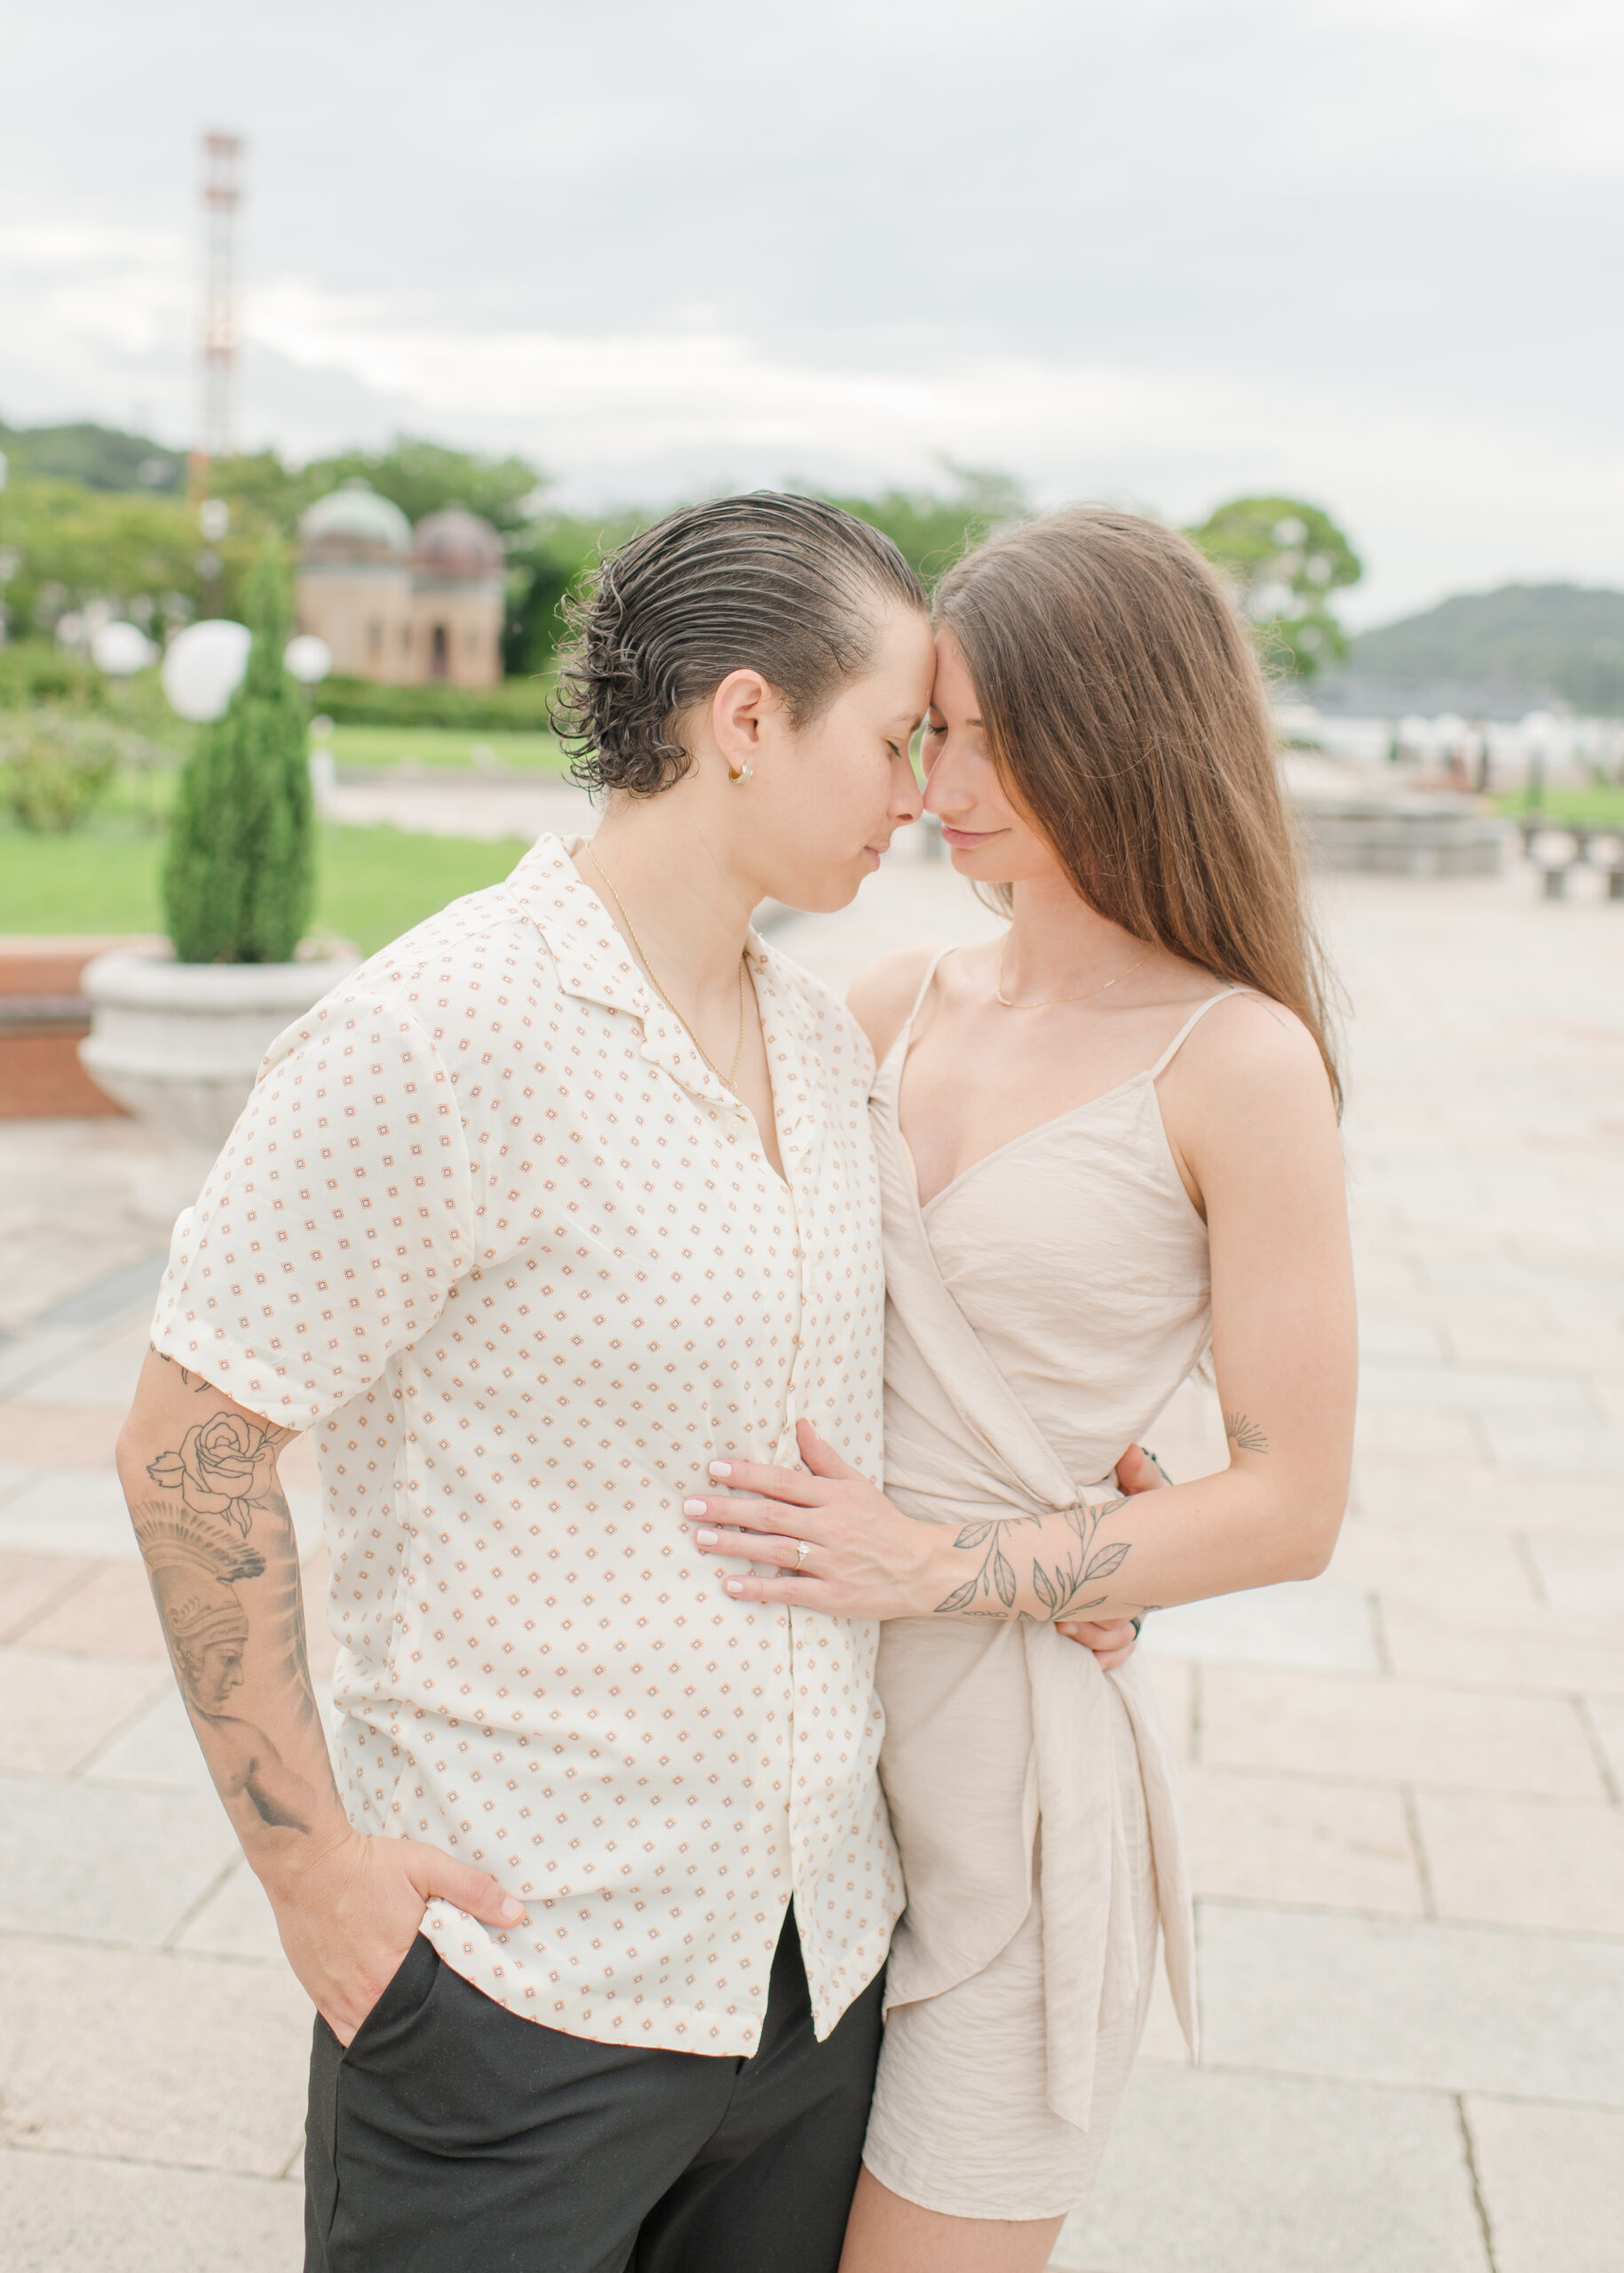 Engagement Photos in Japan